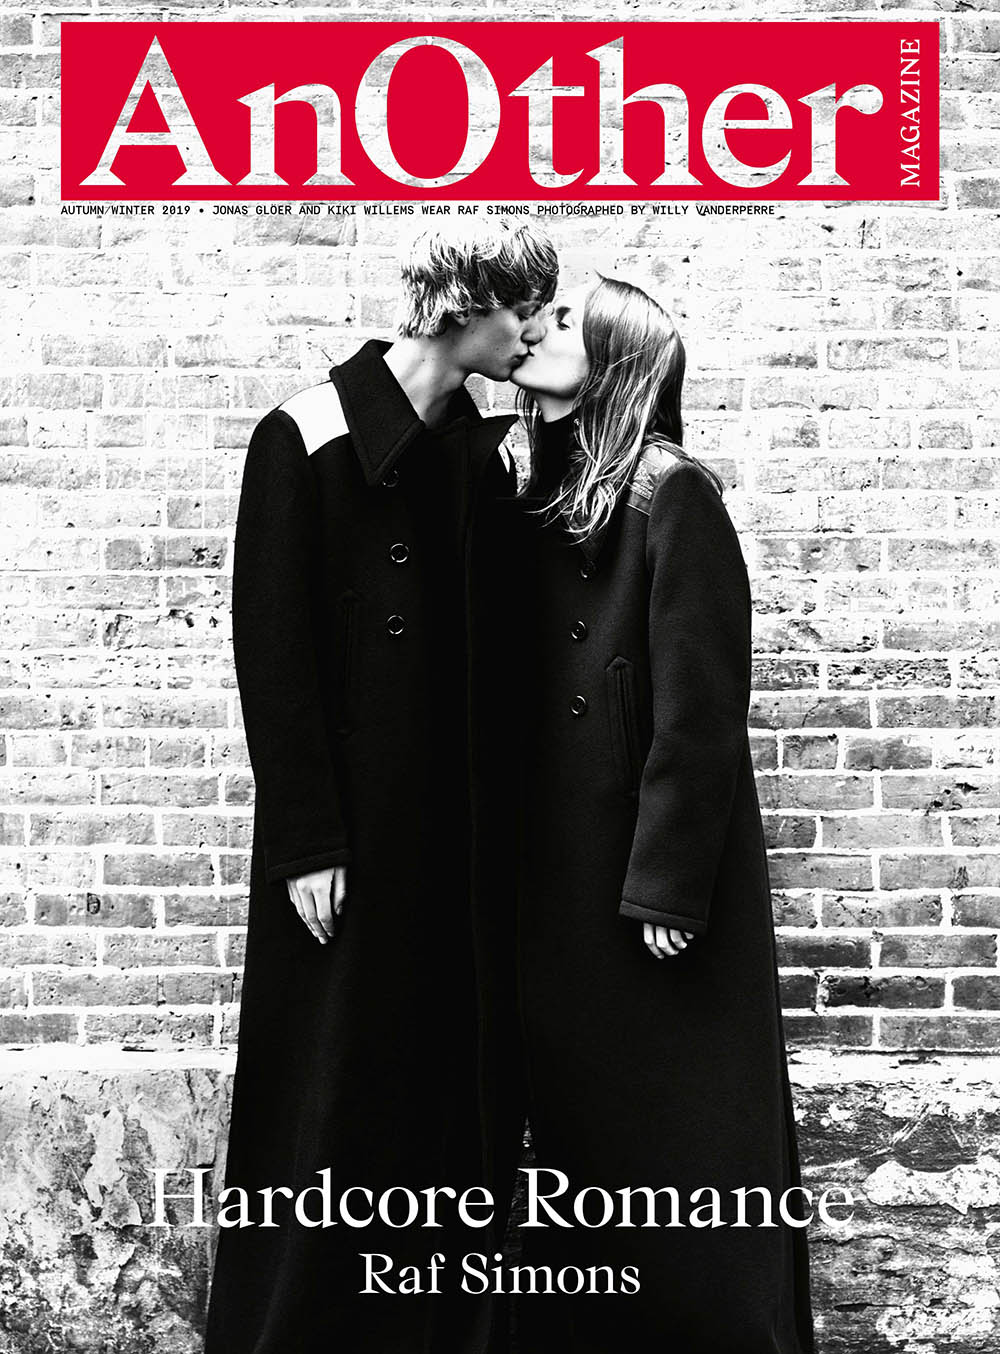 Jonas Glöer and Kiki Willems cover AnOther Magazine Fall Winter 2019 by Willy Vanderperre